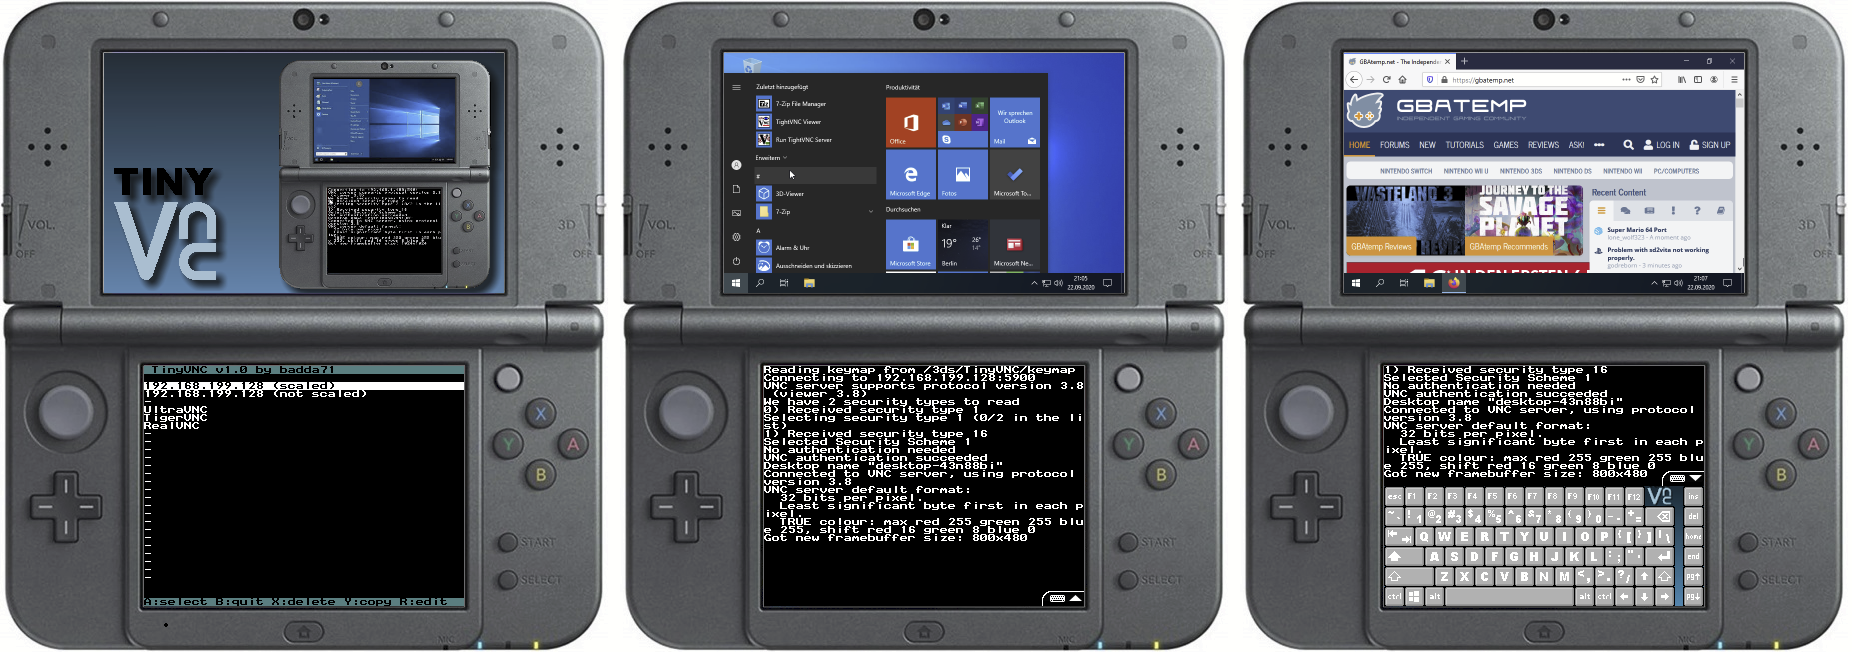 Release] TinyVNC (VNC viewer for Nintendo 3DS) | GBAtemp.net - The  Independent Video Game Community